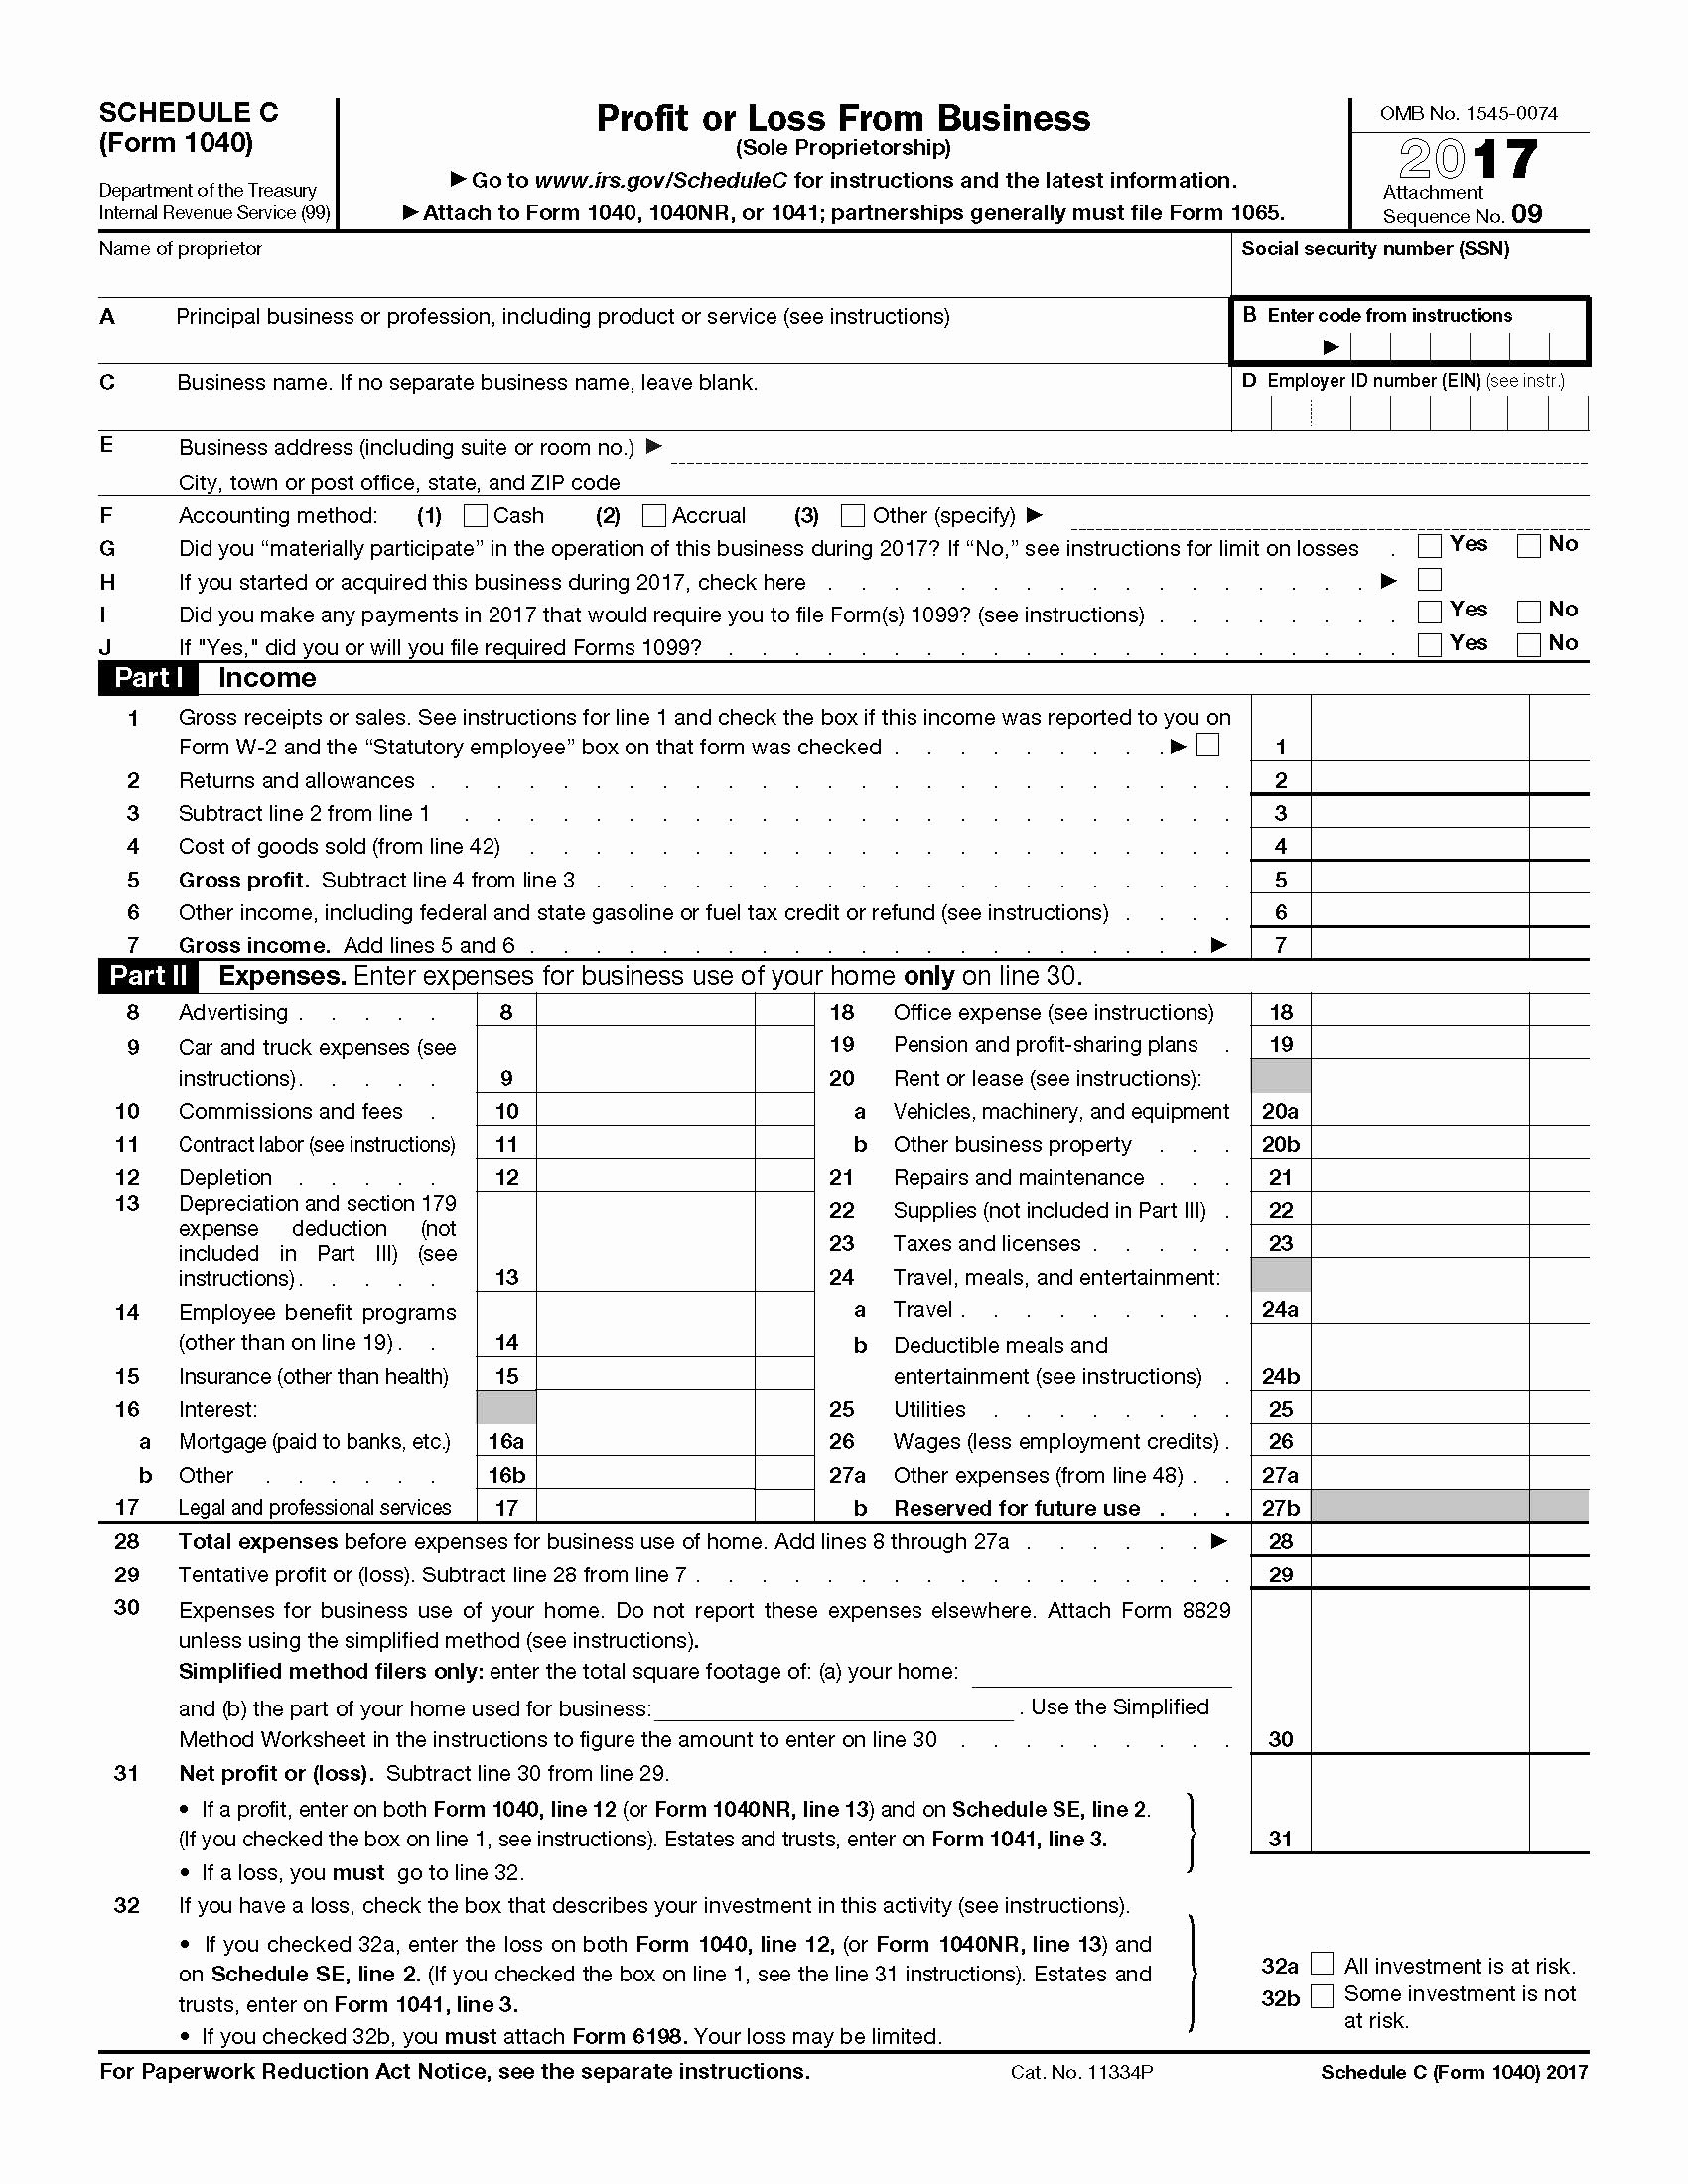 Business Profit and Loss form New 2017 Irs Tax forms 1040 Schedule C Profit Loss From